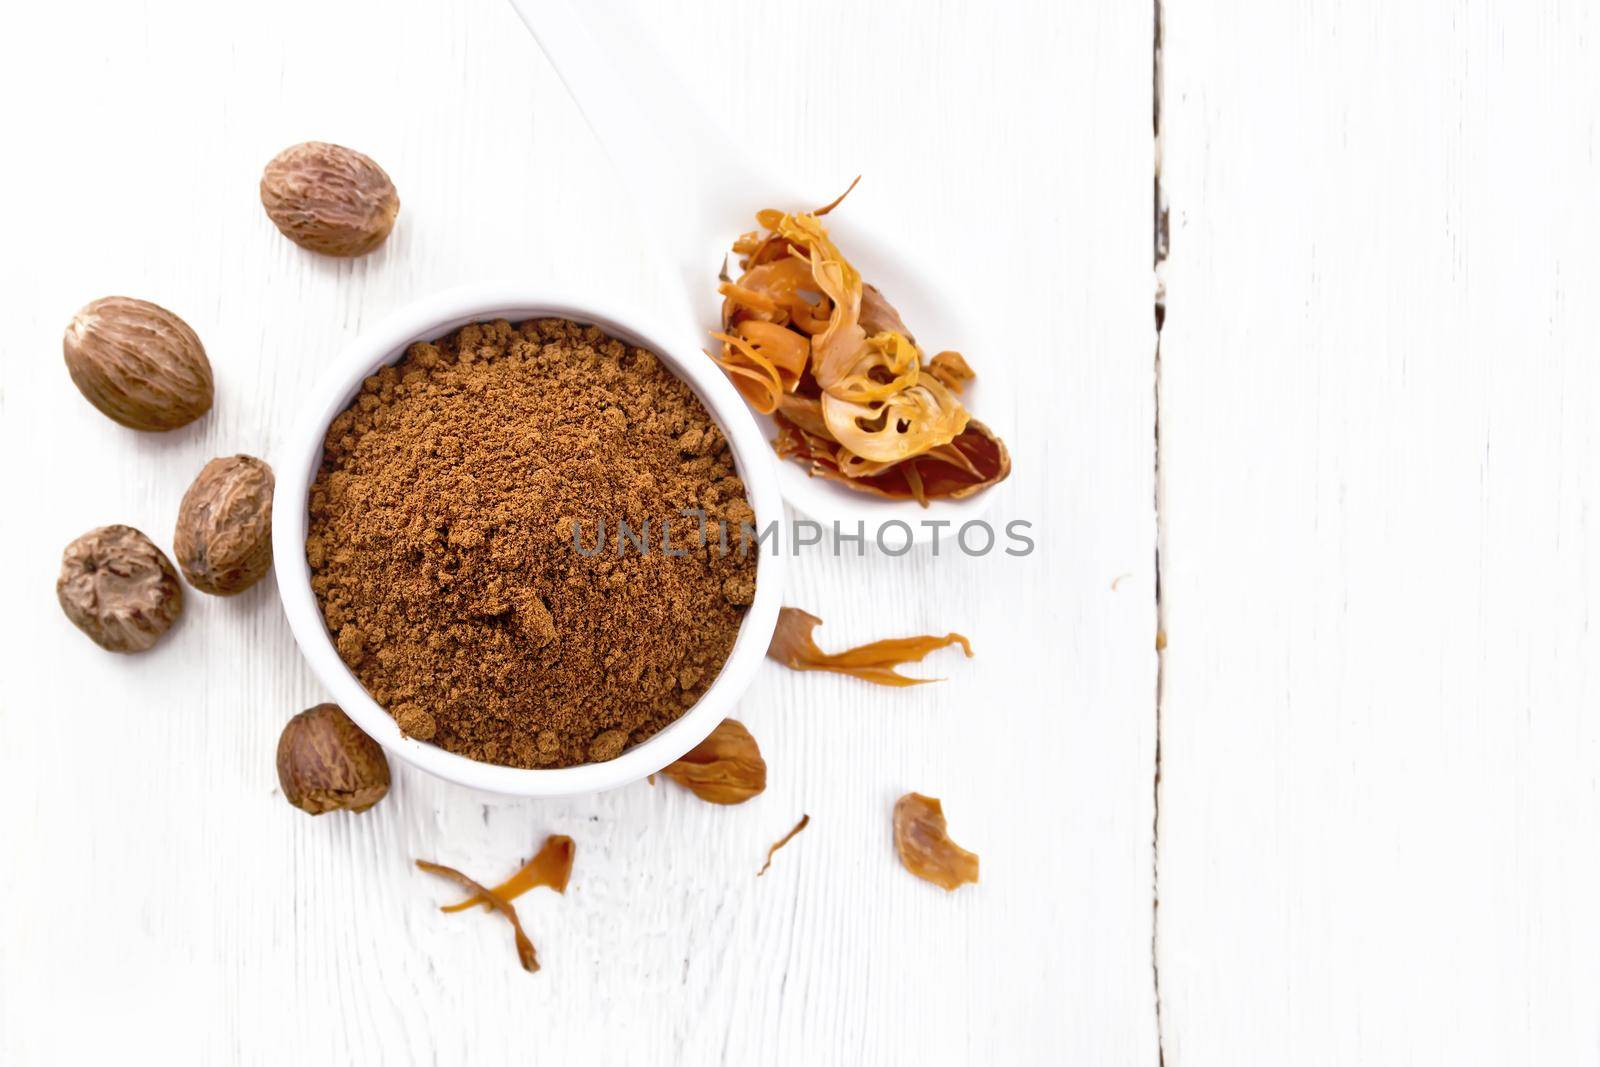 Ground nutmeg in a bowl and dried nutmeg arillus in a spoon, whole nuts on wooden board background from above